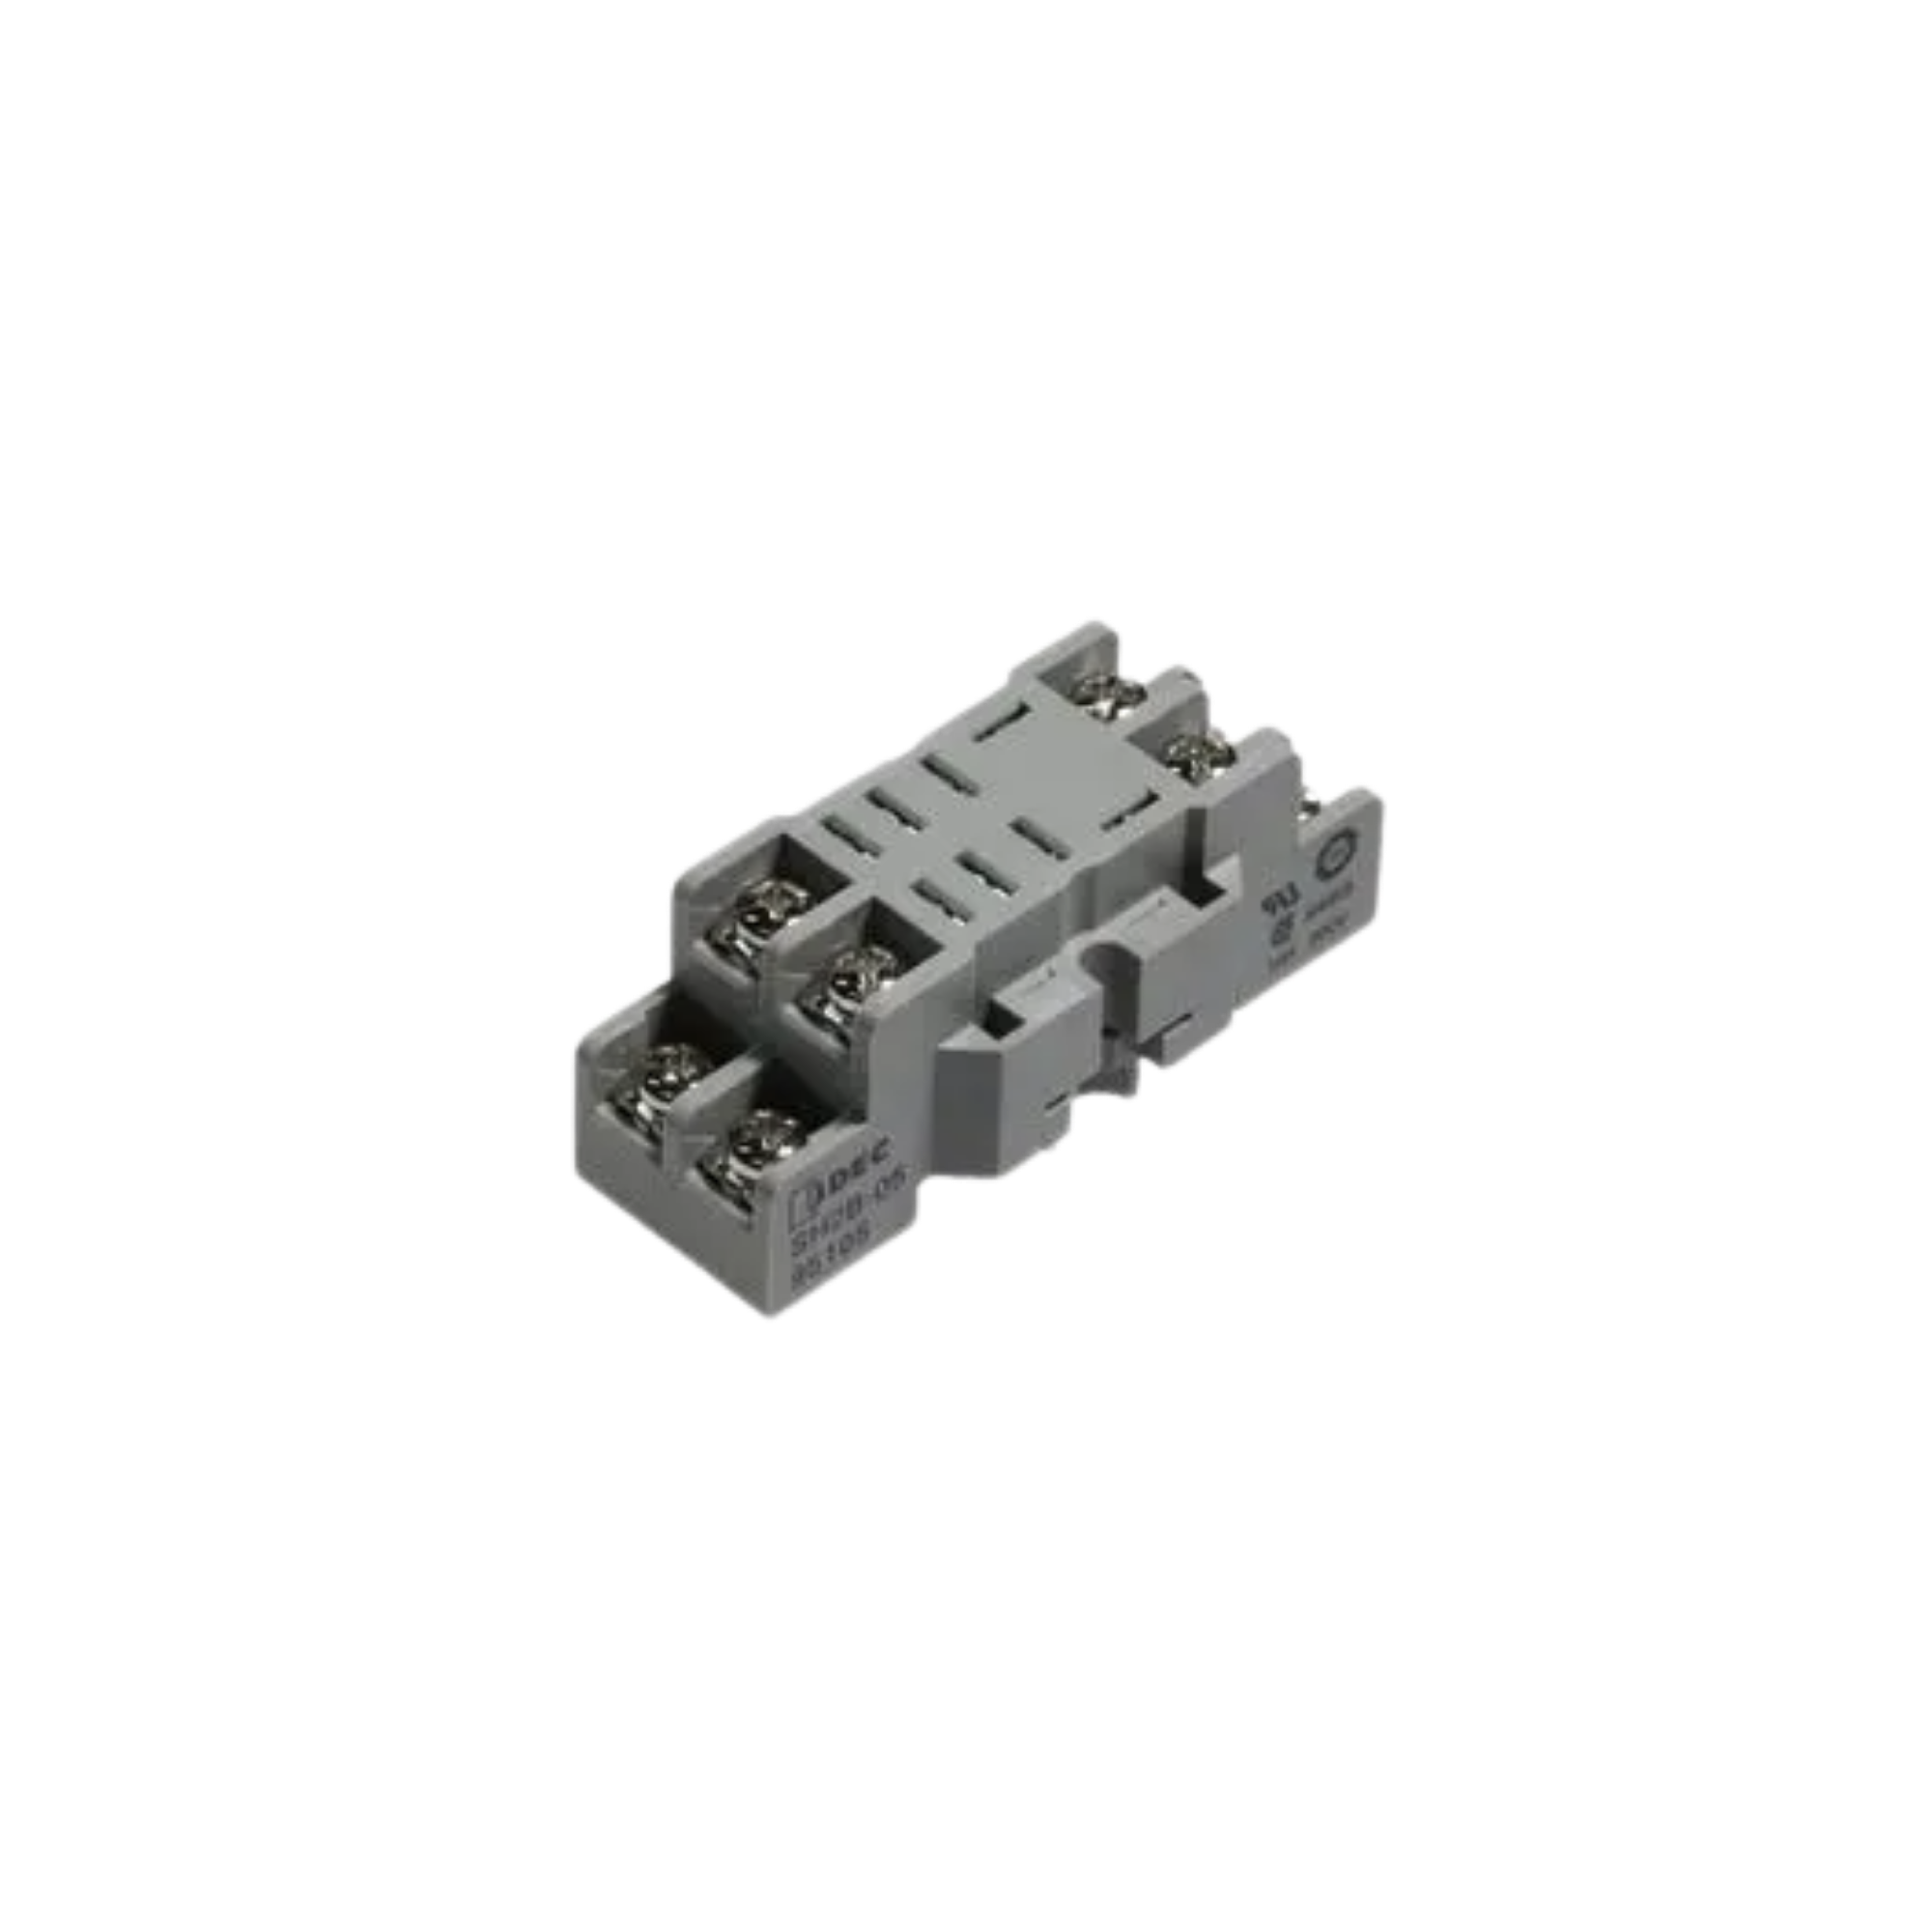 side view of a grey plastic relay socket unit with eight pins